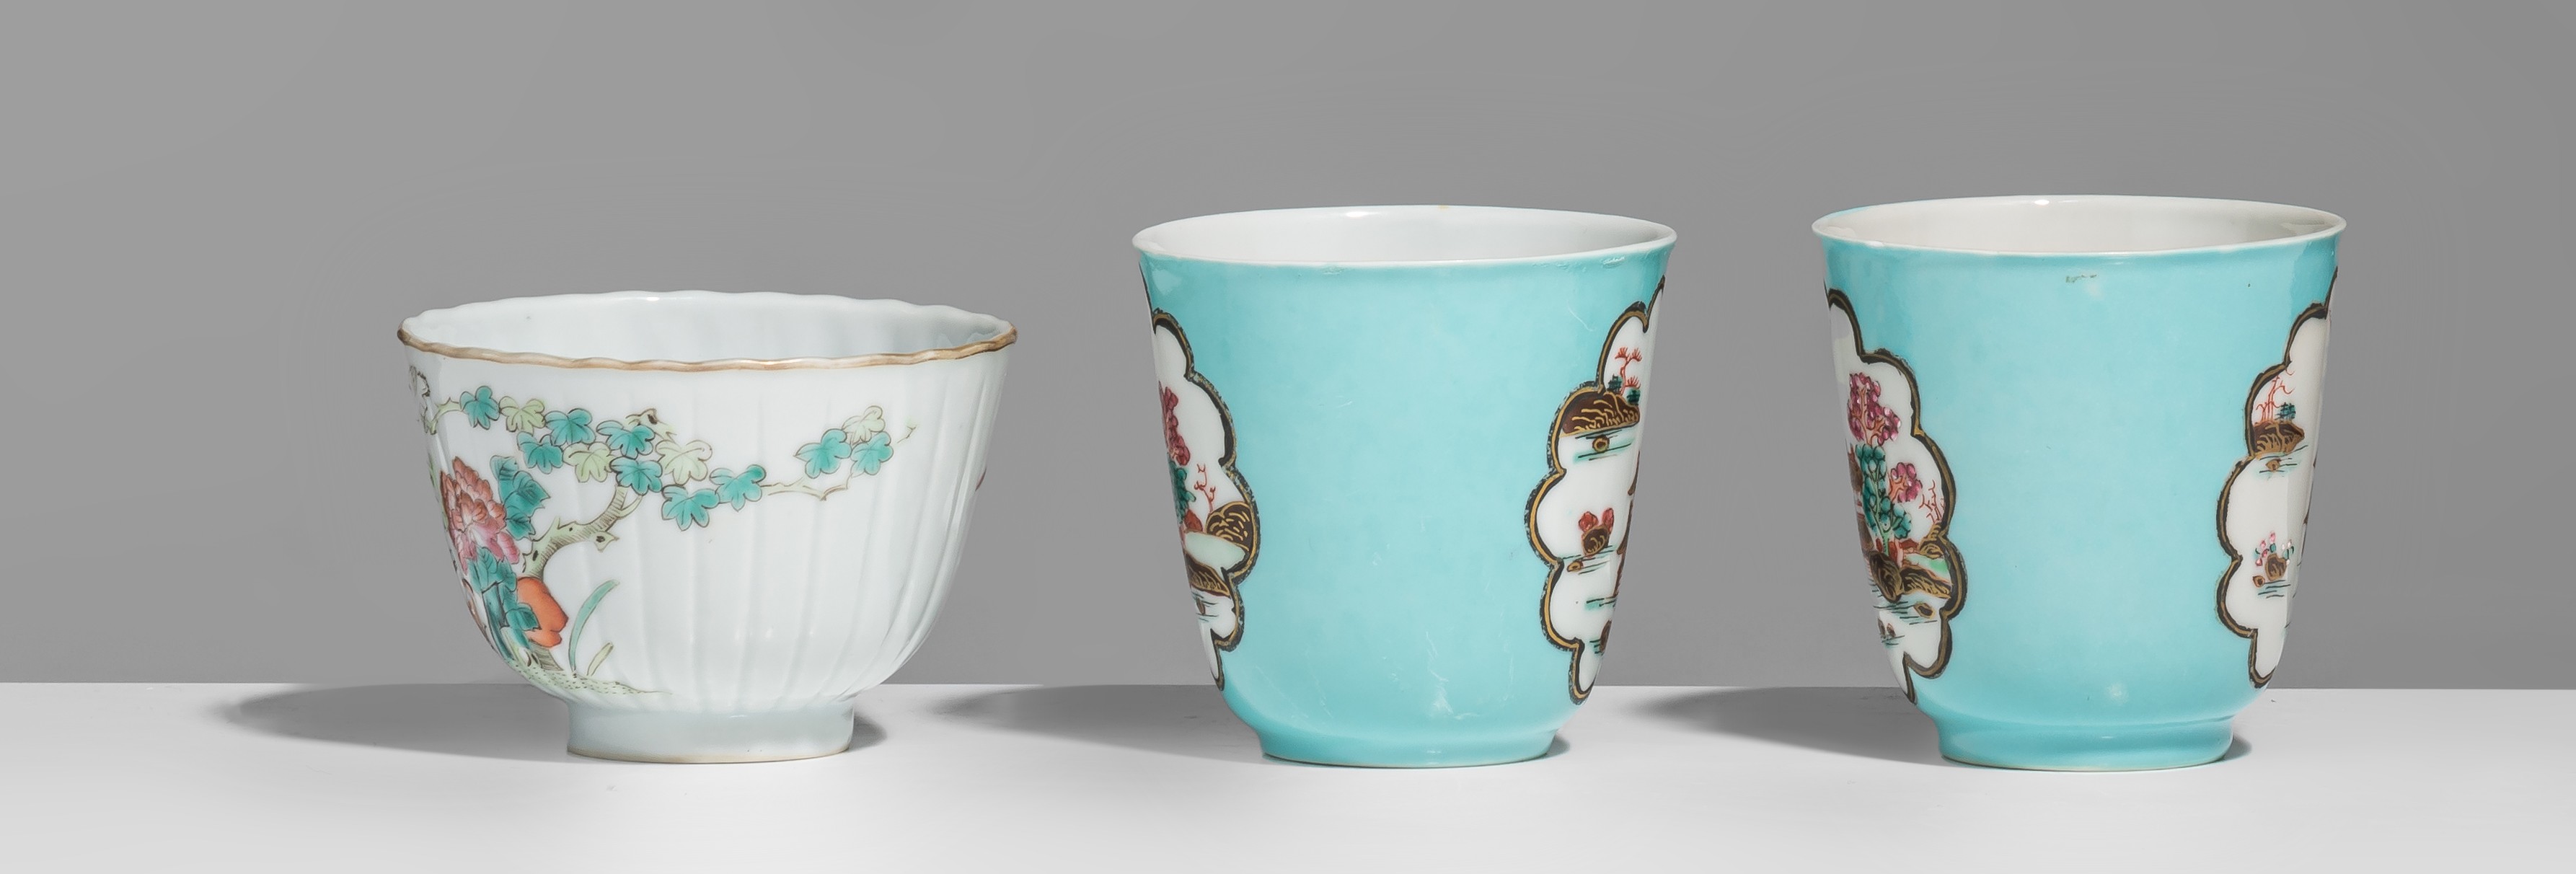 Two rare sets of Meissen-inspired Chinese export porcelain cups and saucers, 18thC, tallest H 7,5 cm - Image 5 of 10